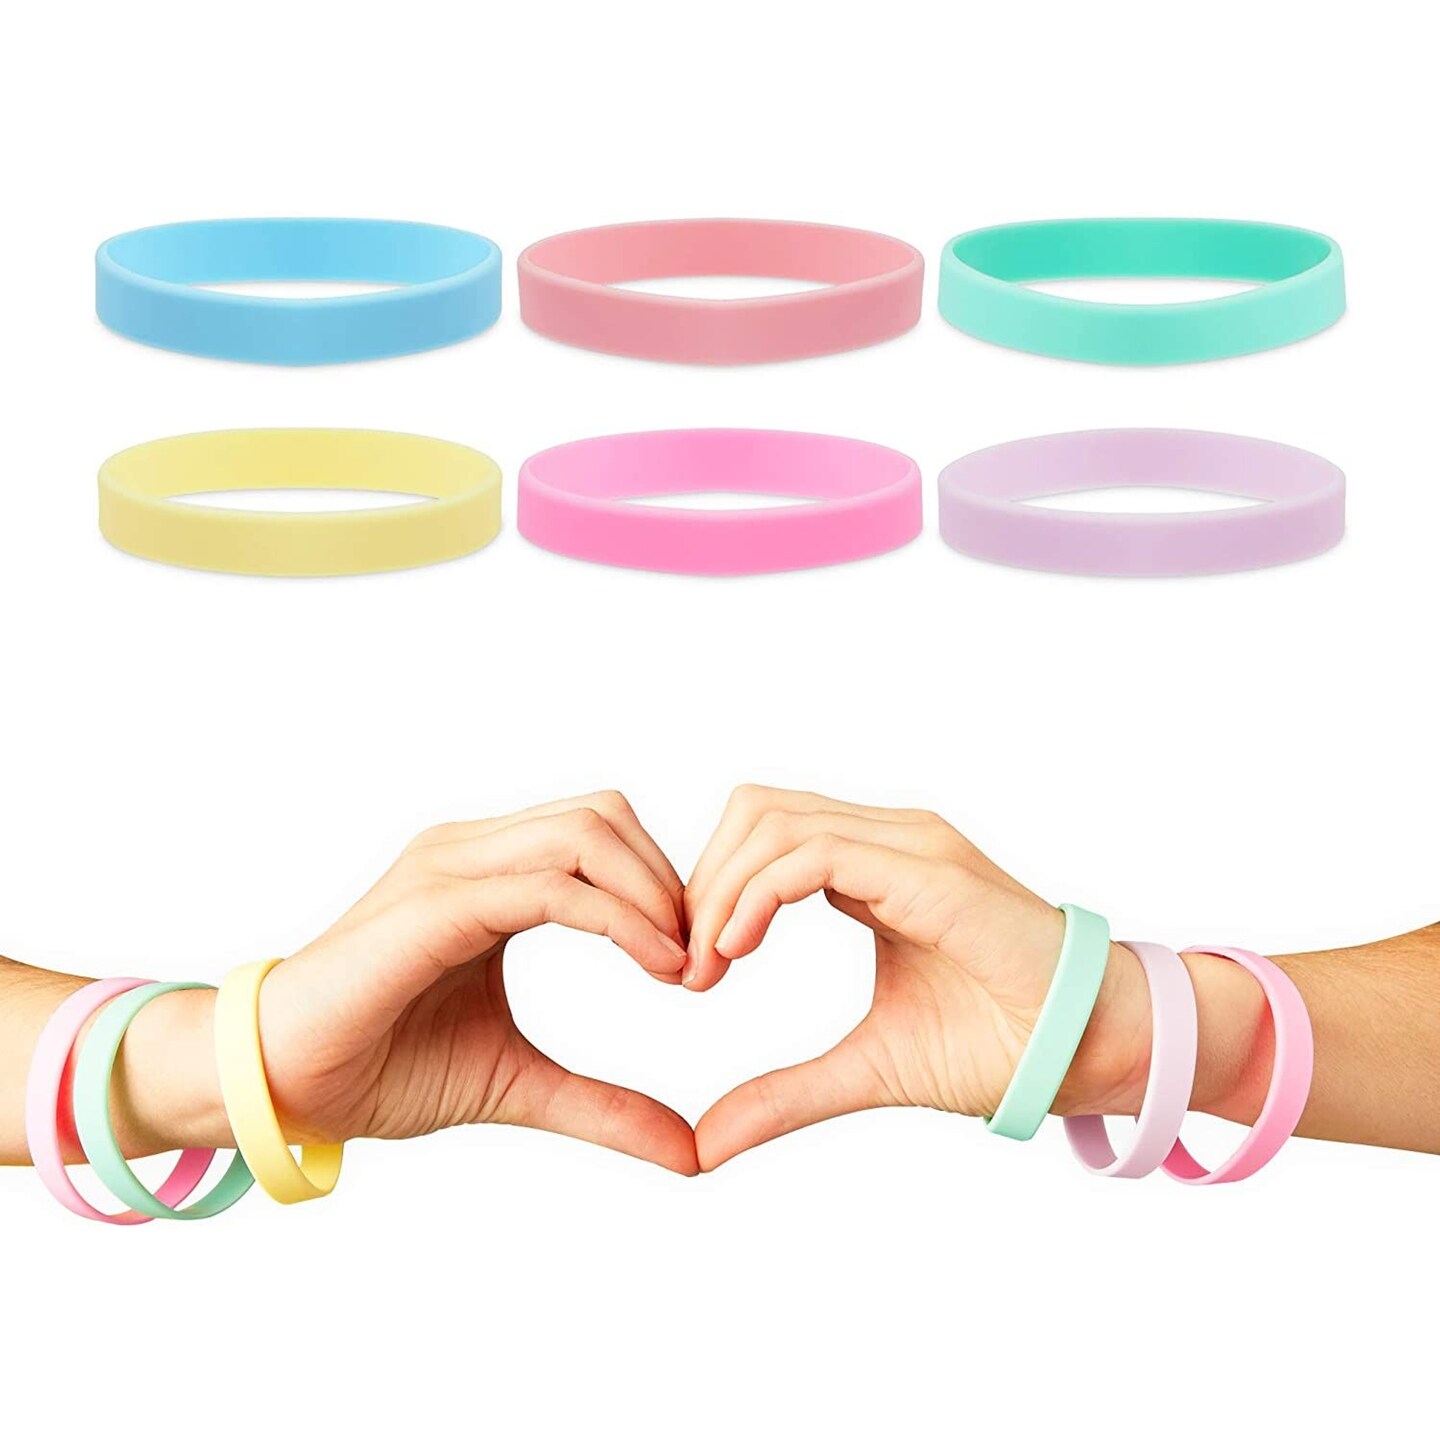 Pastel Silicone Bracelets, Kids Party Favors (0.45 x 2.5 in, 6 Colors, 48 Pack)